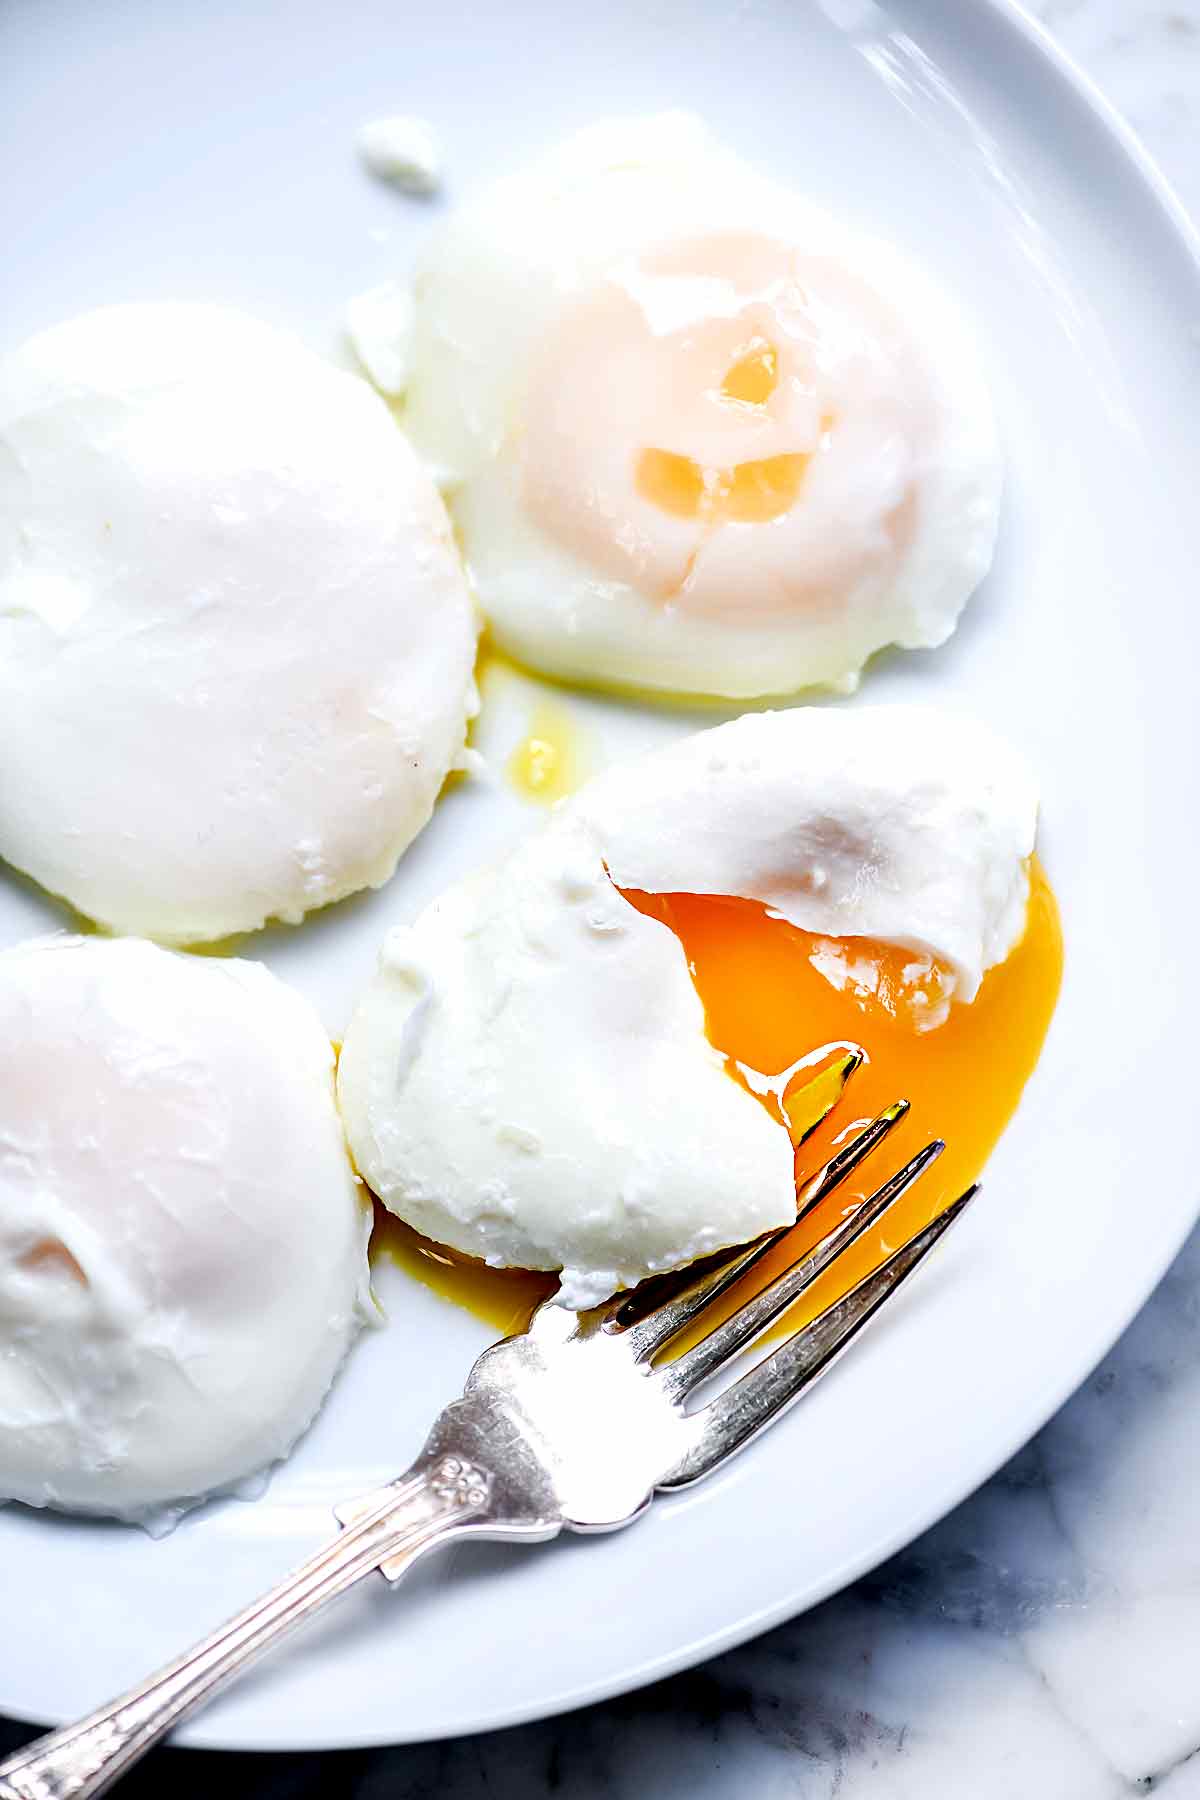 https://www.foodiecrush.com/poached-eggs/how-to-poach-eggs-foodiecrush-com-030/